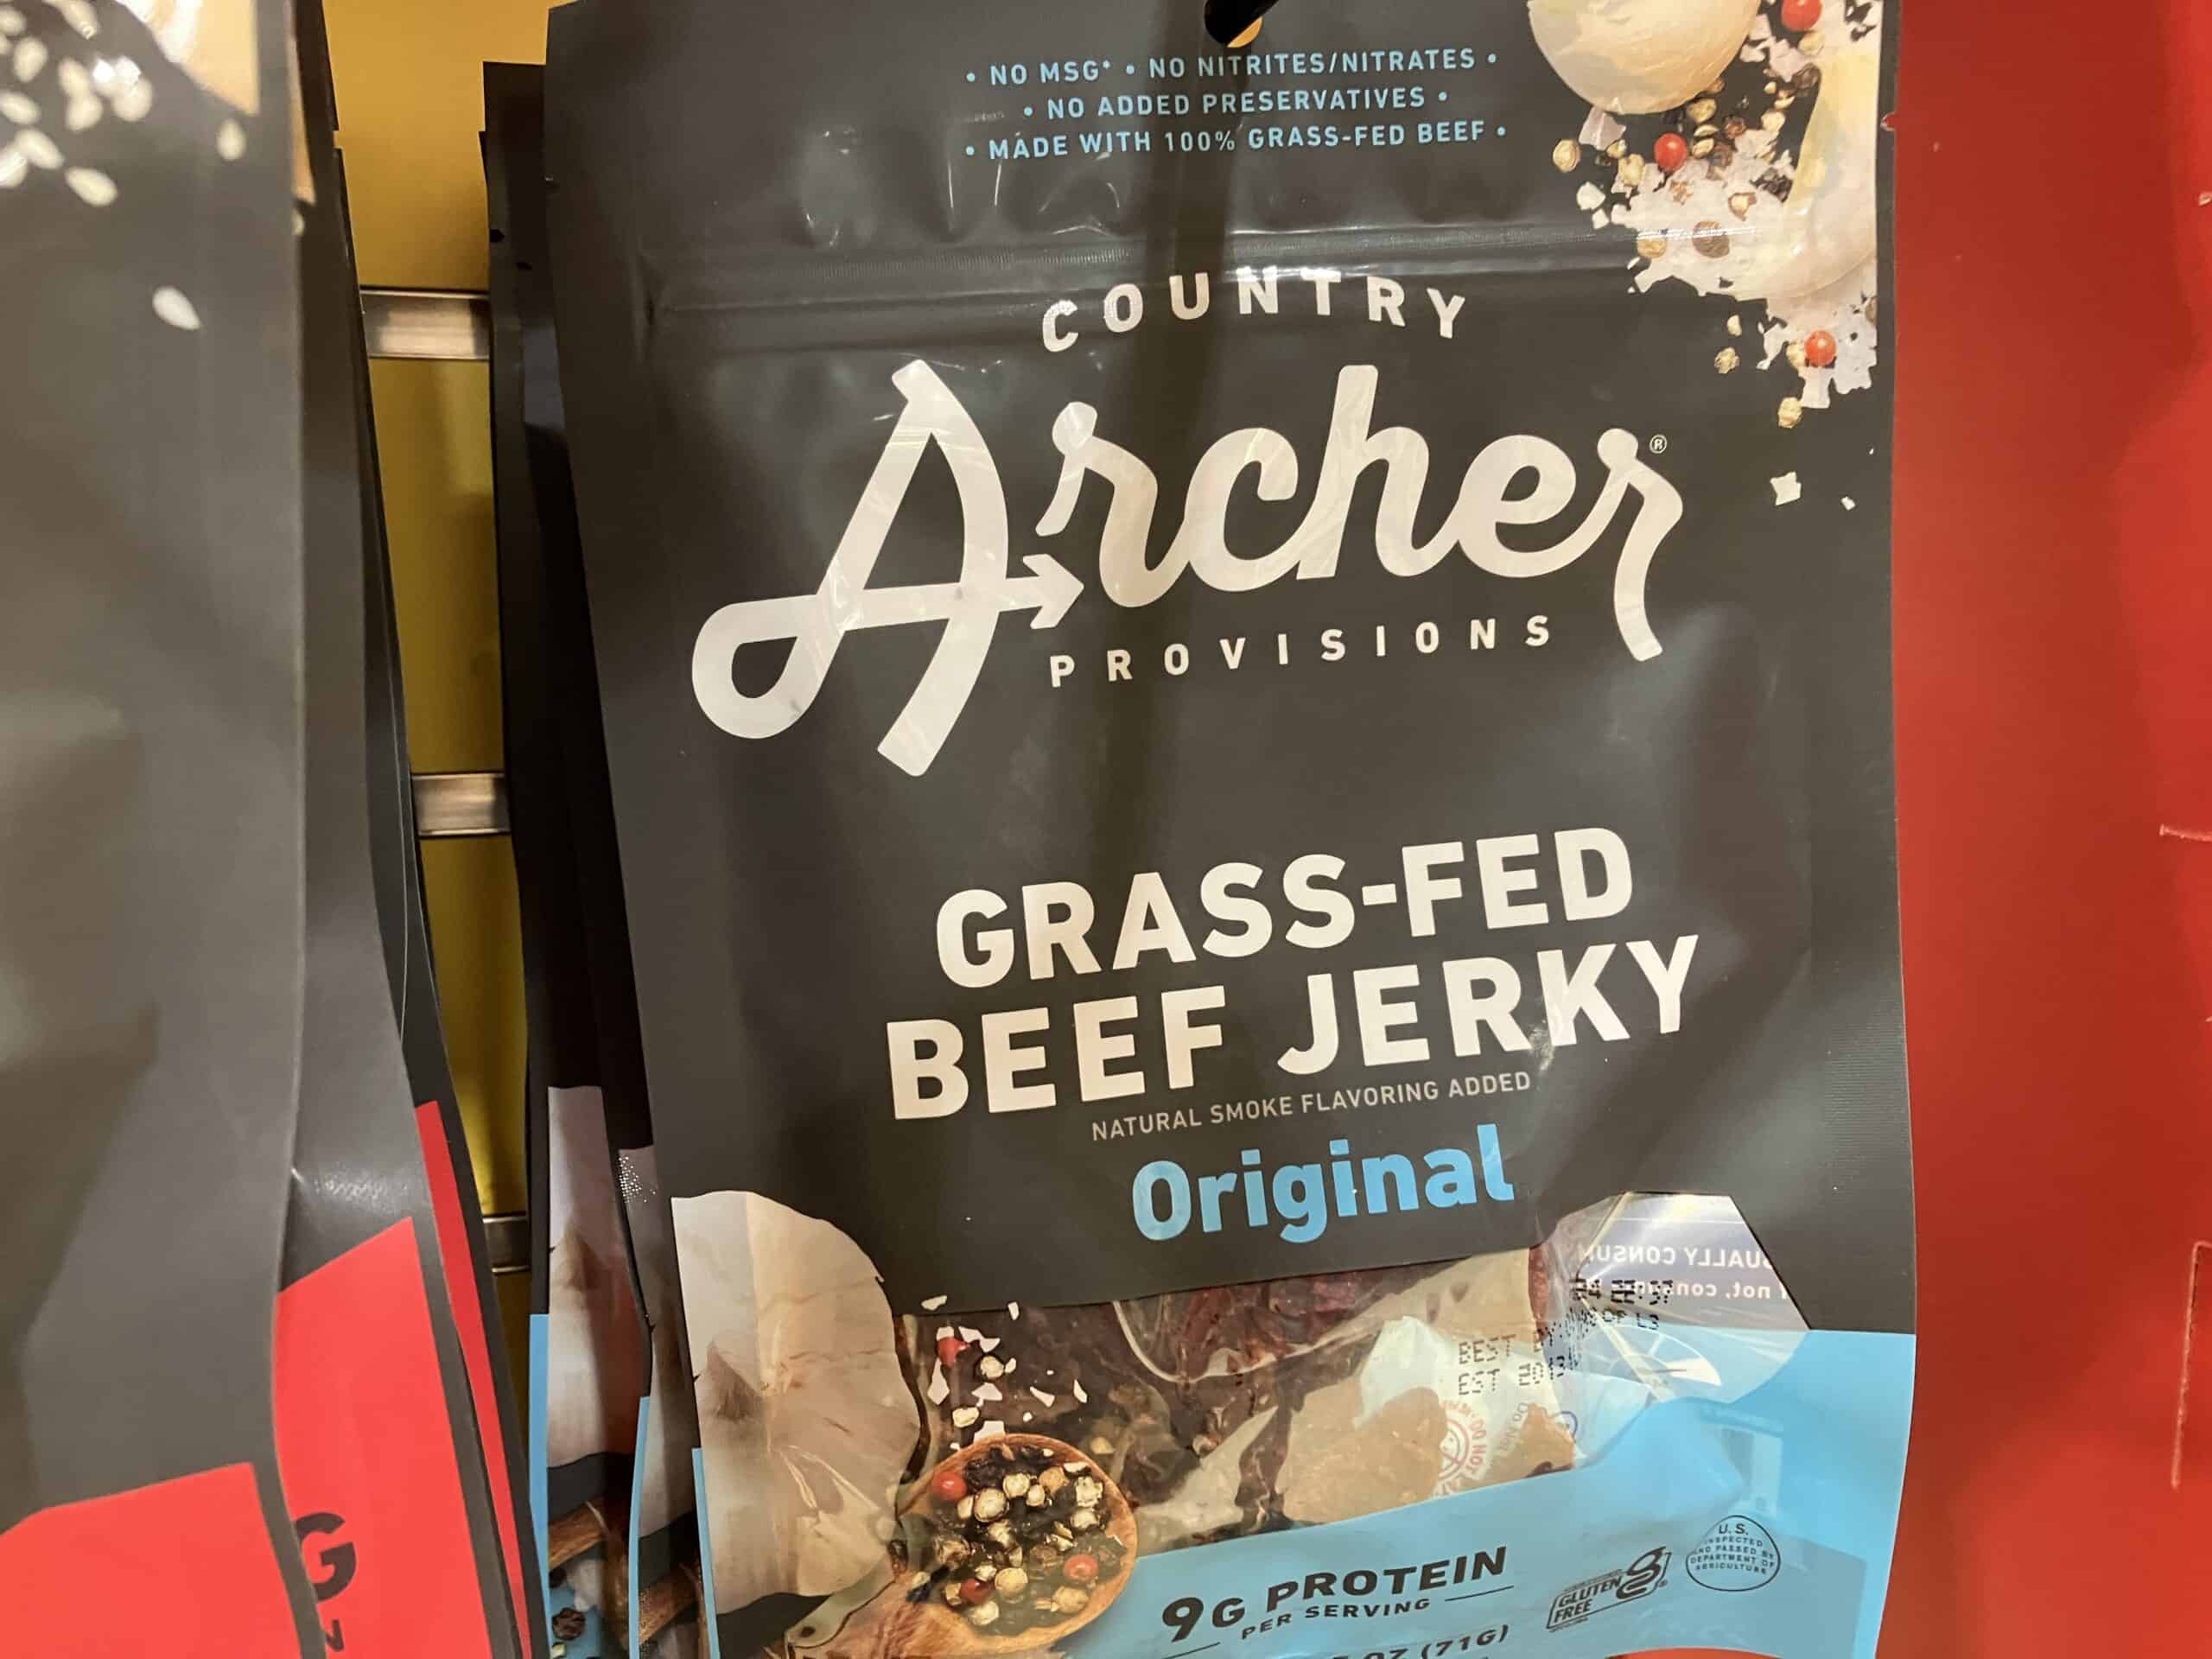 Country Archer beef jerky